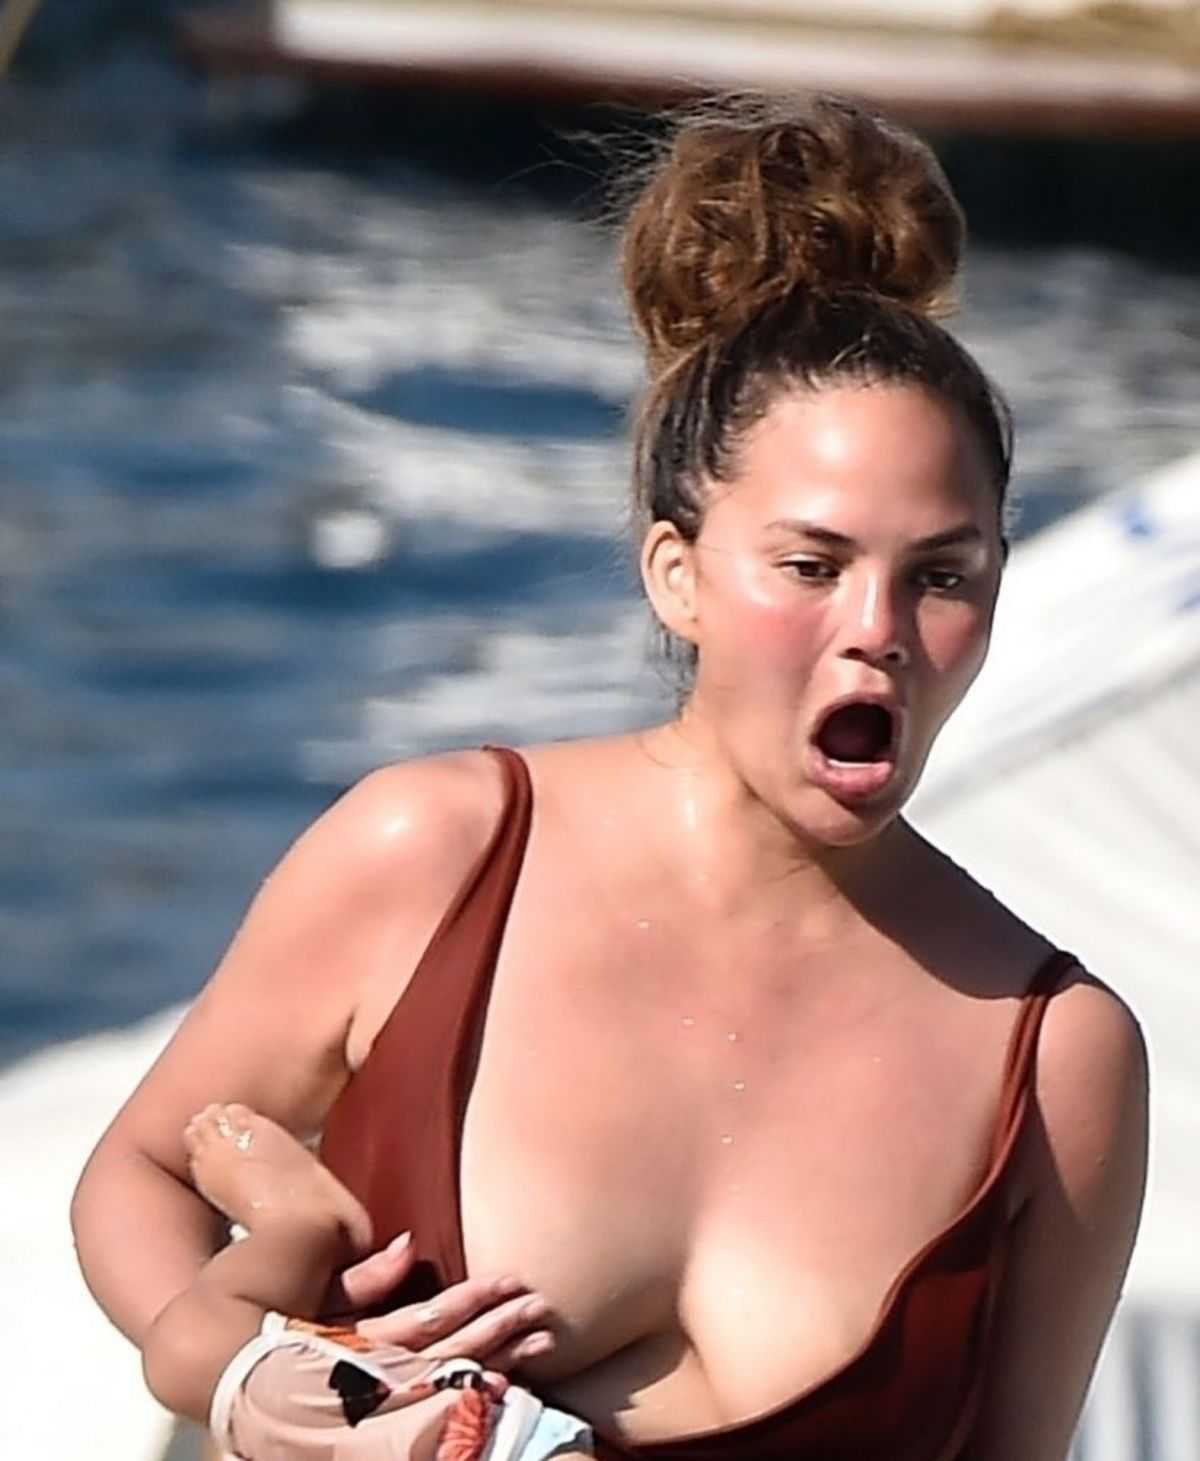 70+ Hottest Chrissy Teigen Pictures That Are Too Hot To Handle 167